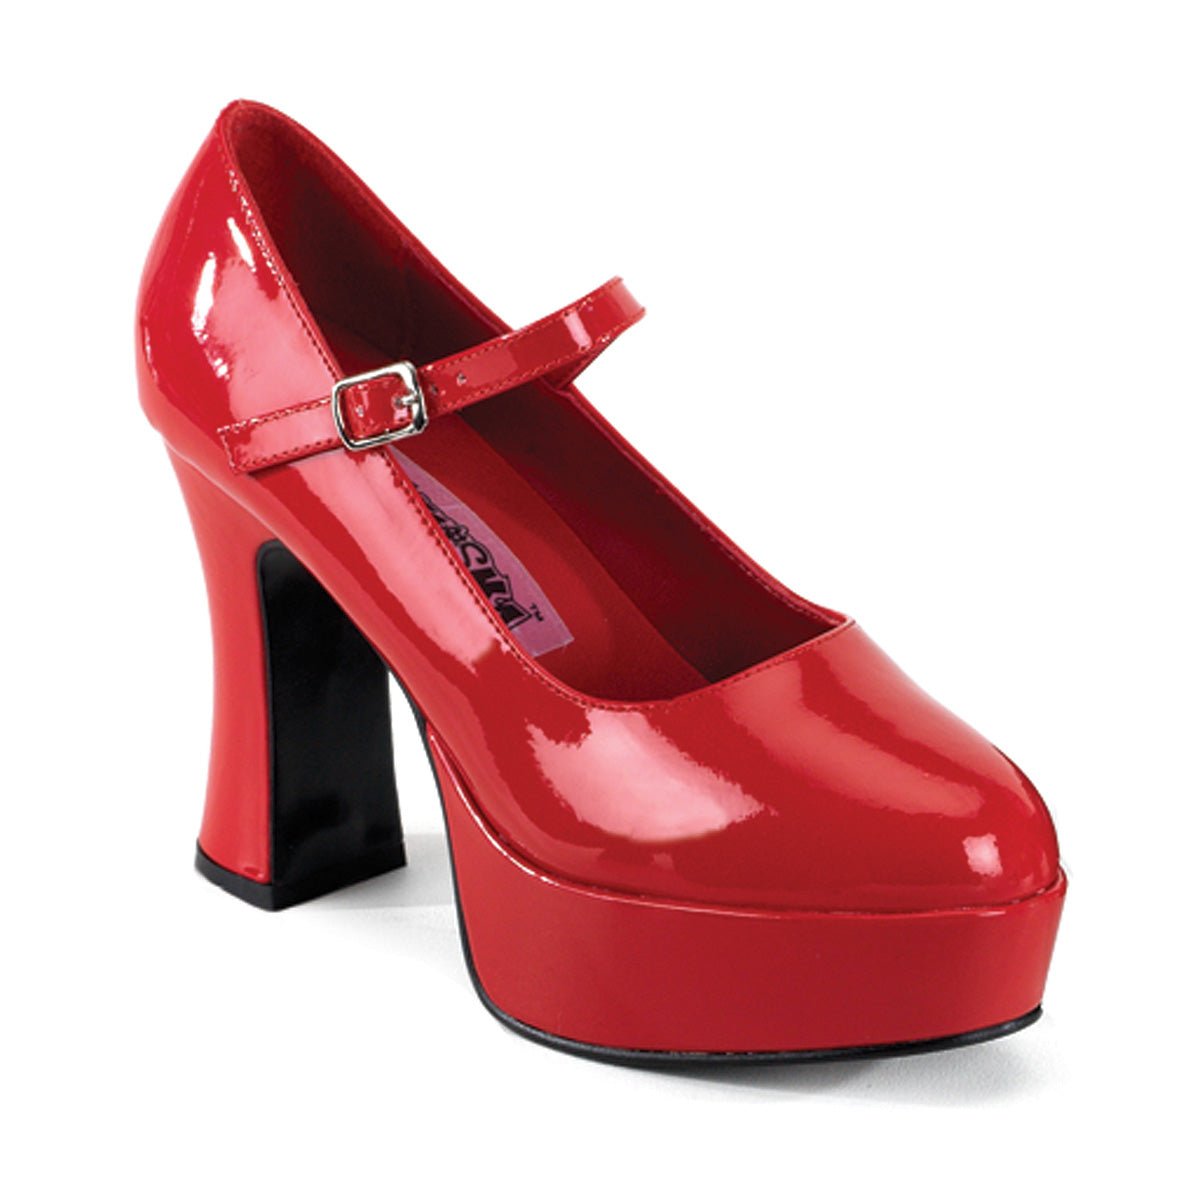 Clearance Funtasma MaryJane 50 Red Size 4UK/7USA - From Clearance Sold By Alternative Footwear